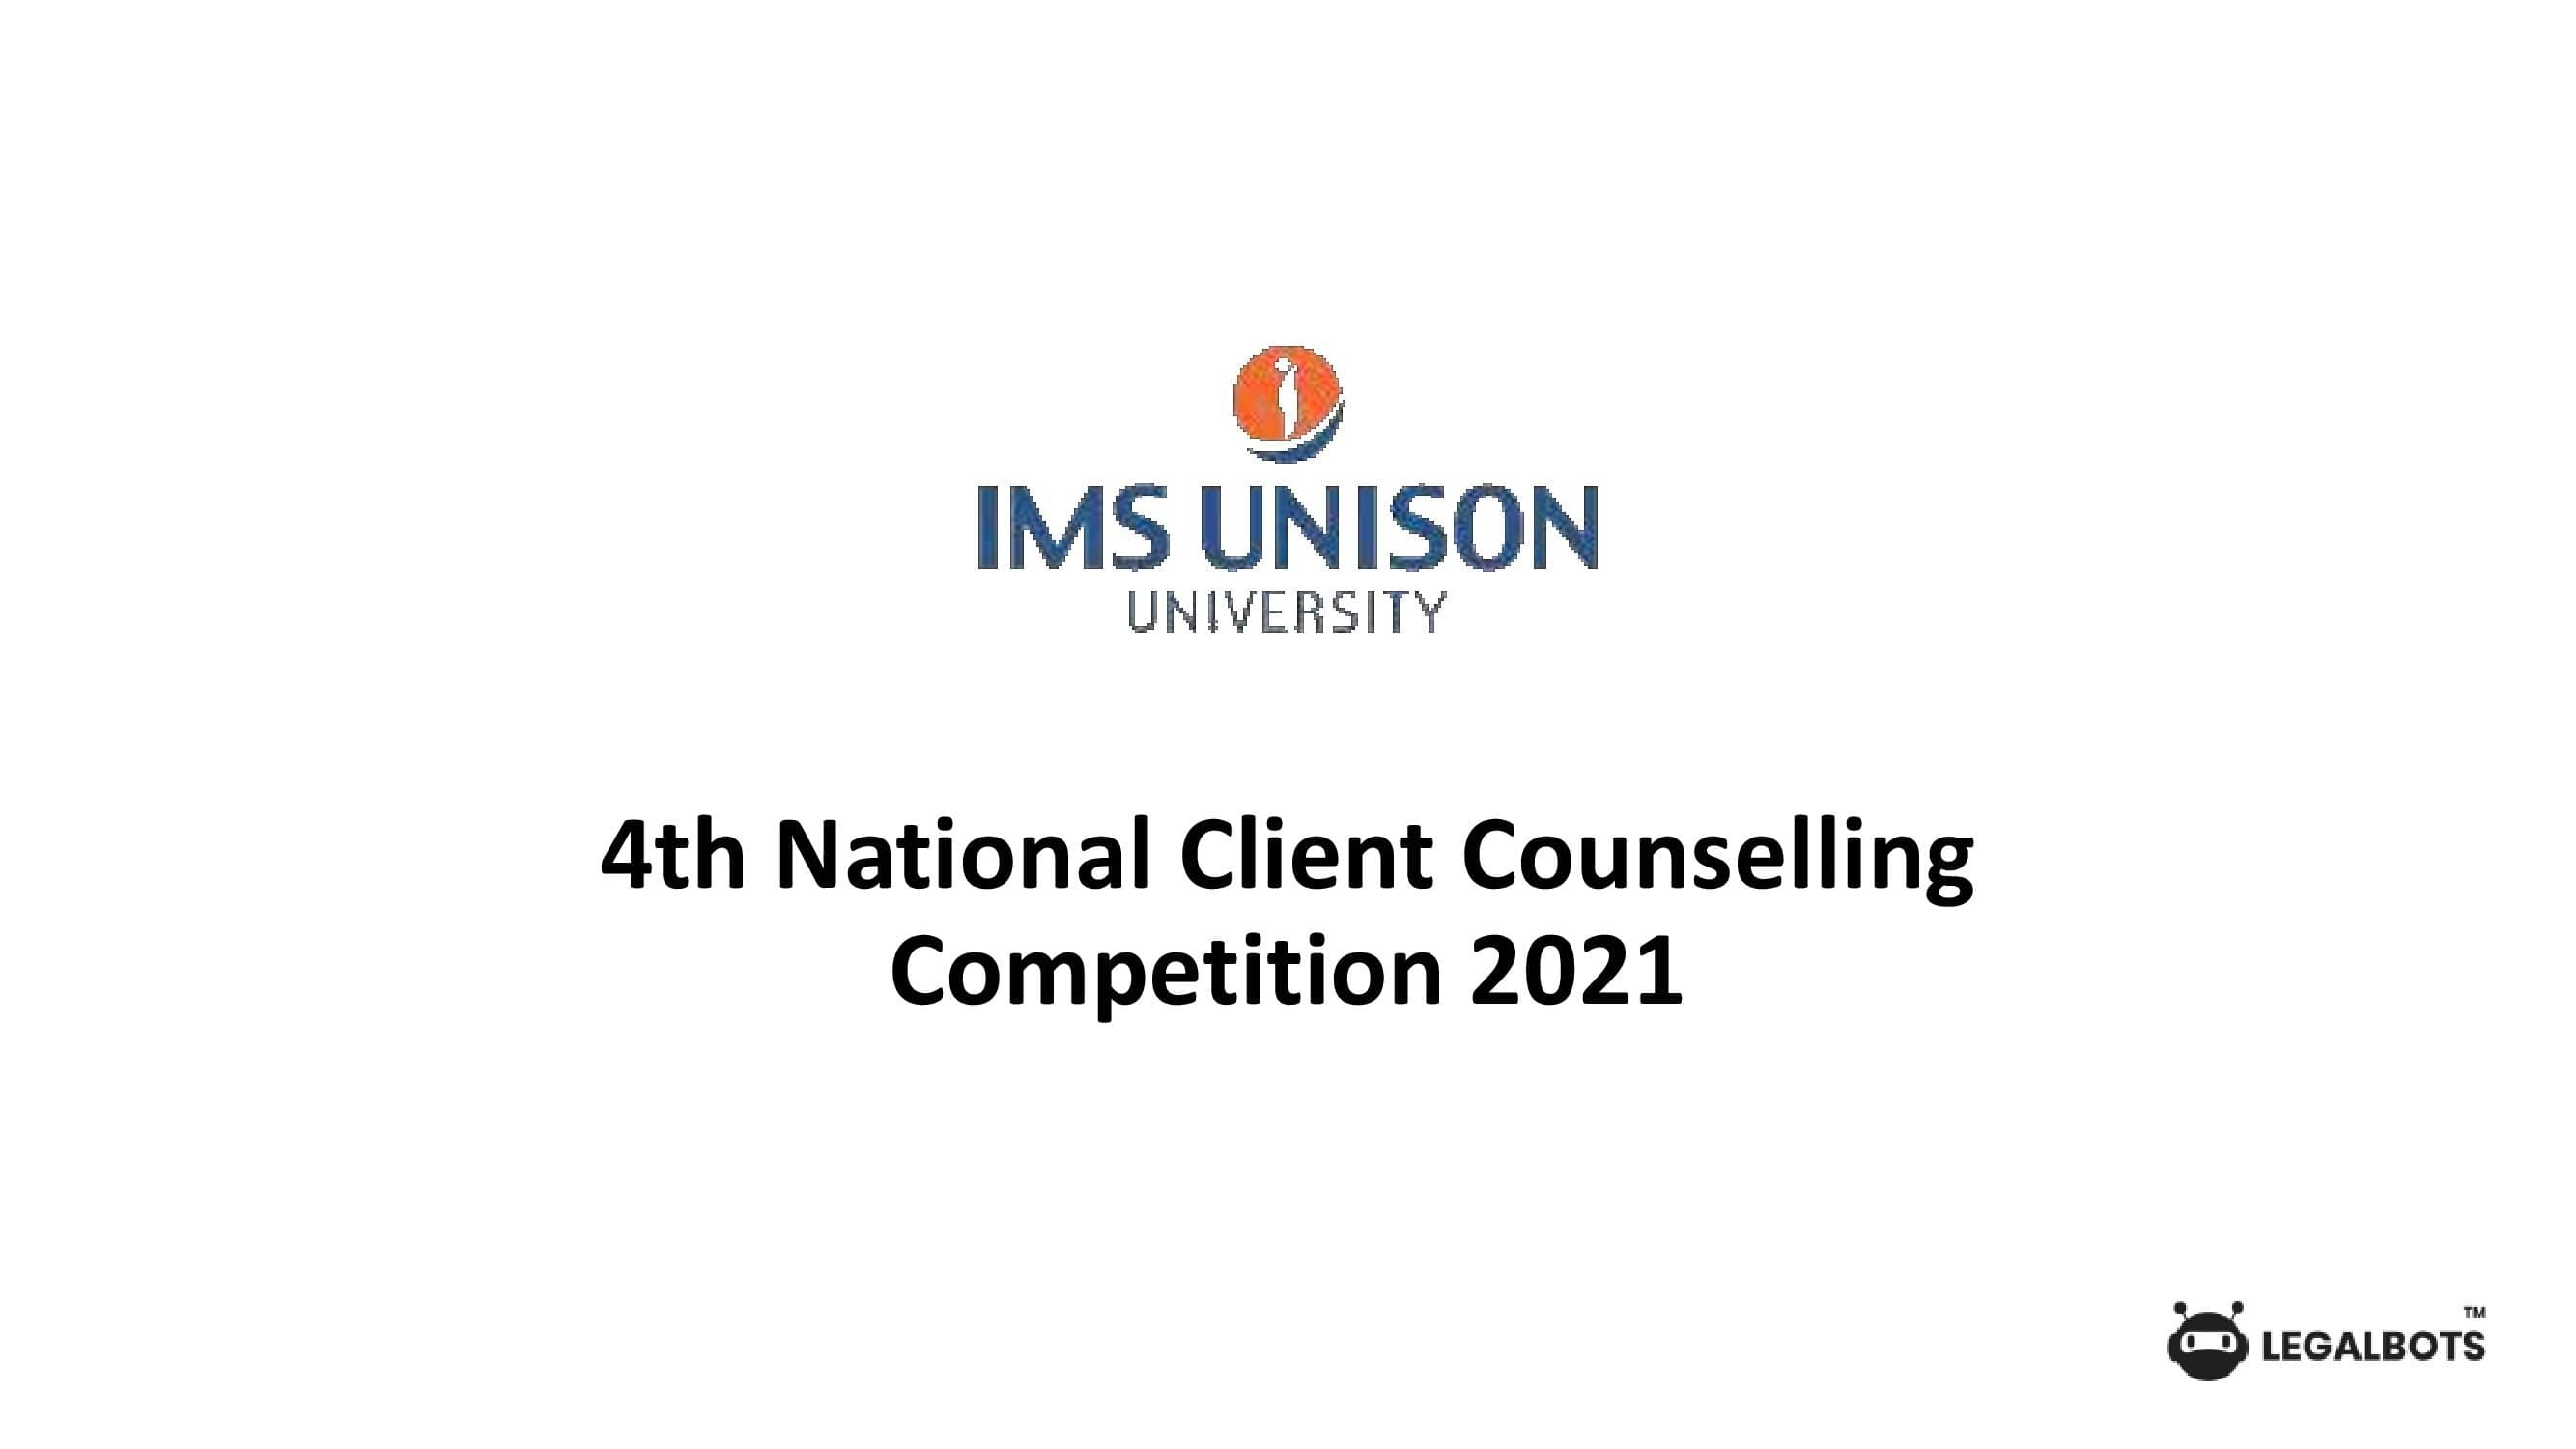 4th National Client Counselling Competition 2021